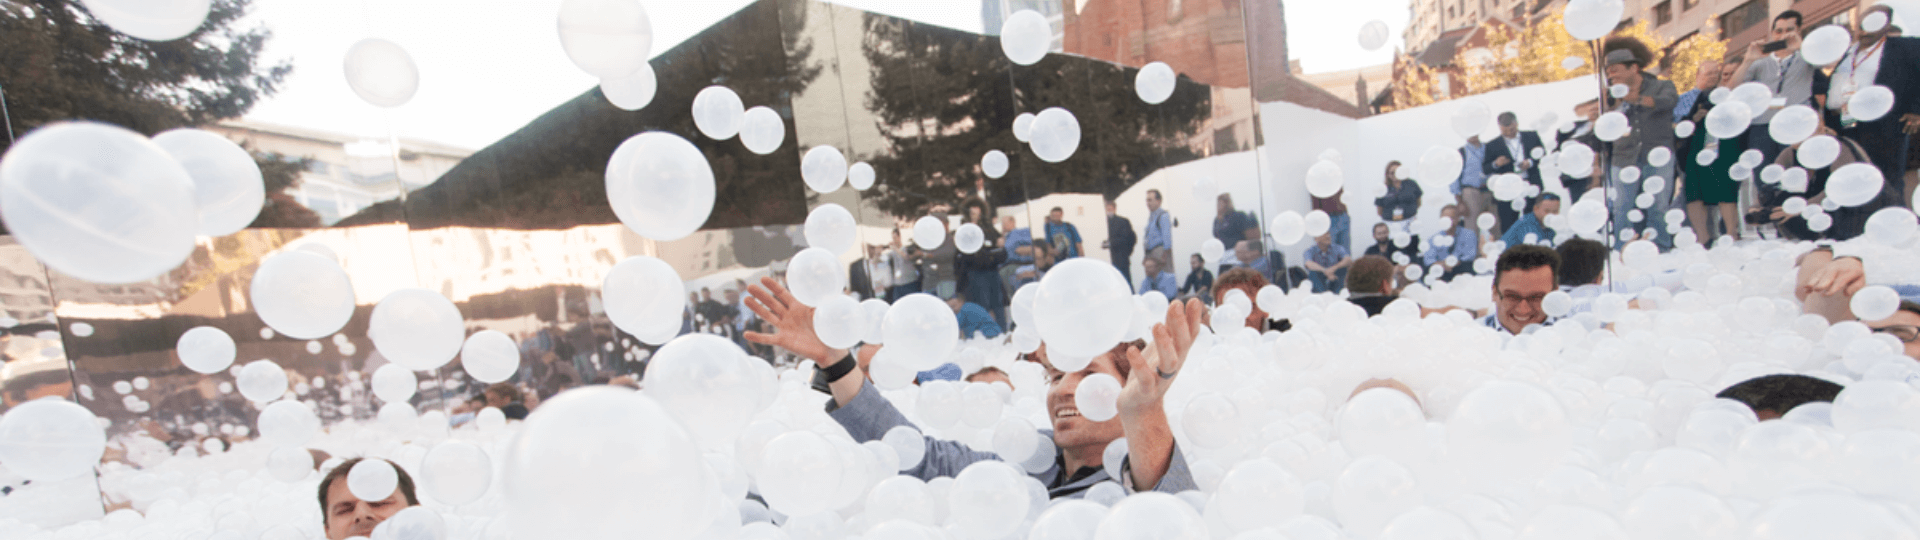 Art installation of people in a mirrored courtyard surrounded by beachballs